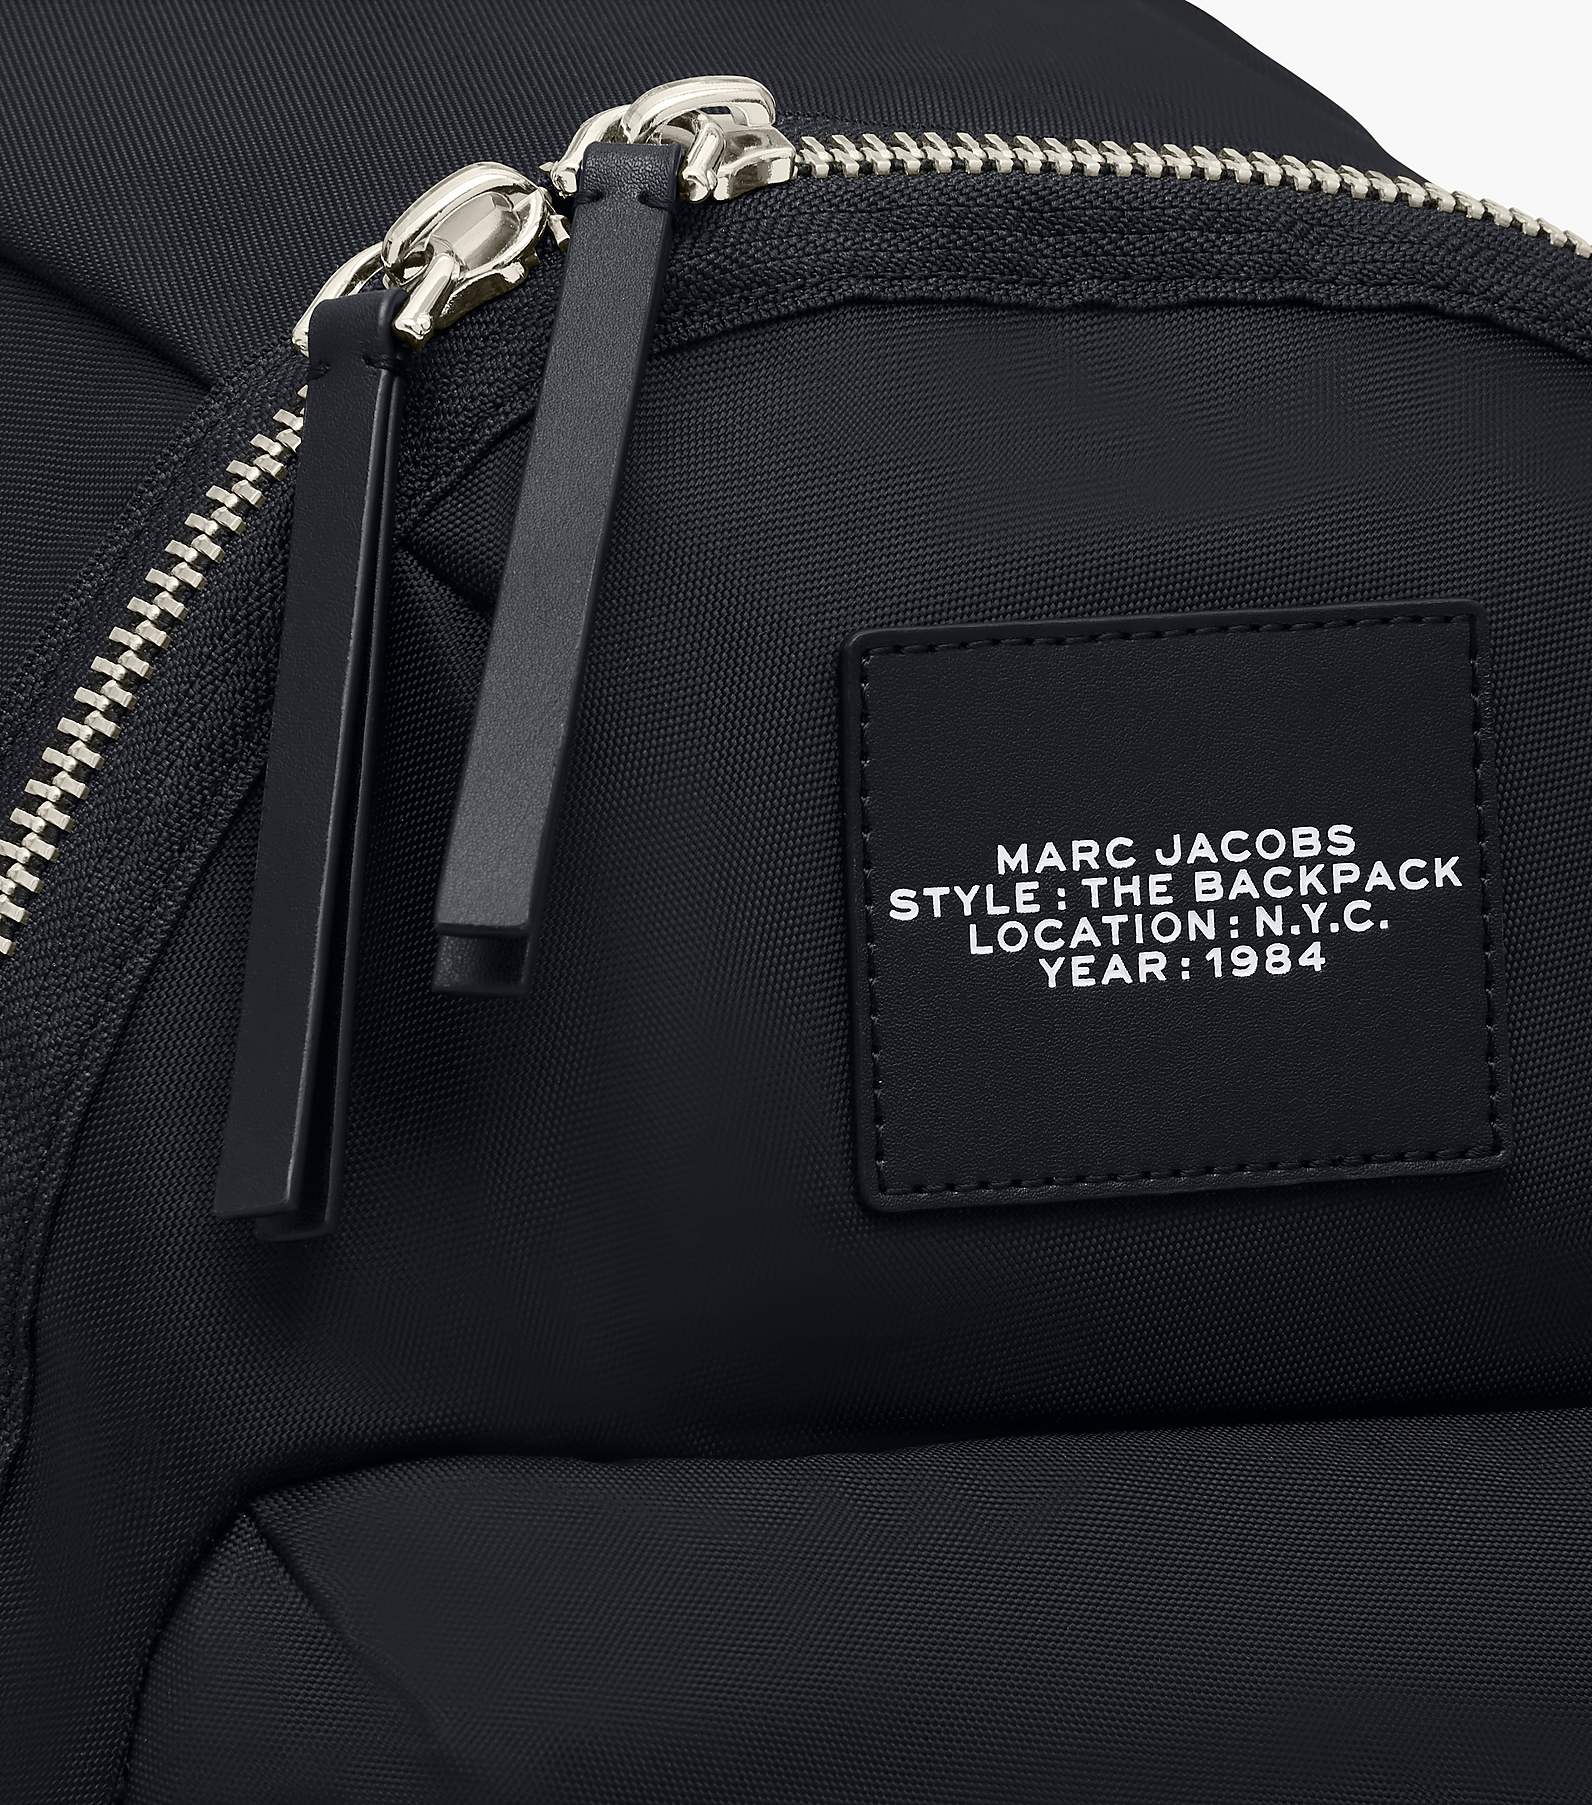 MARC JACOBS バックパック リュック